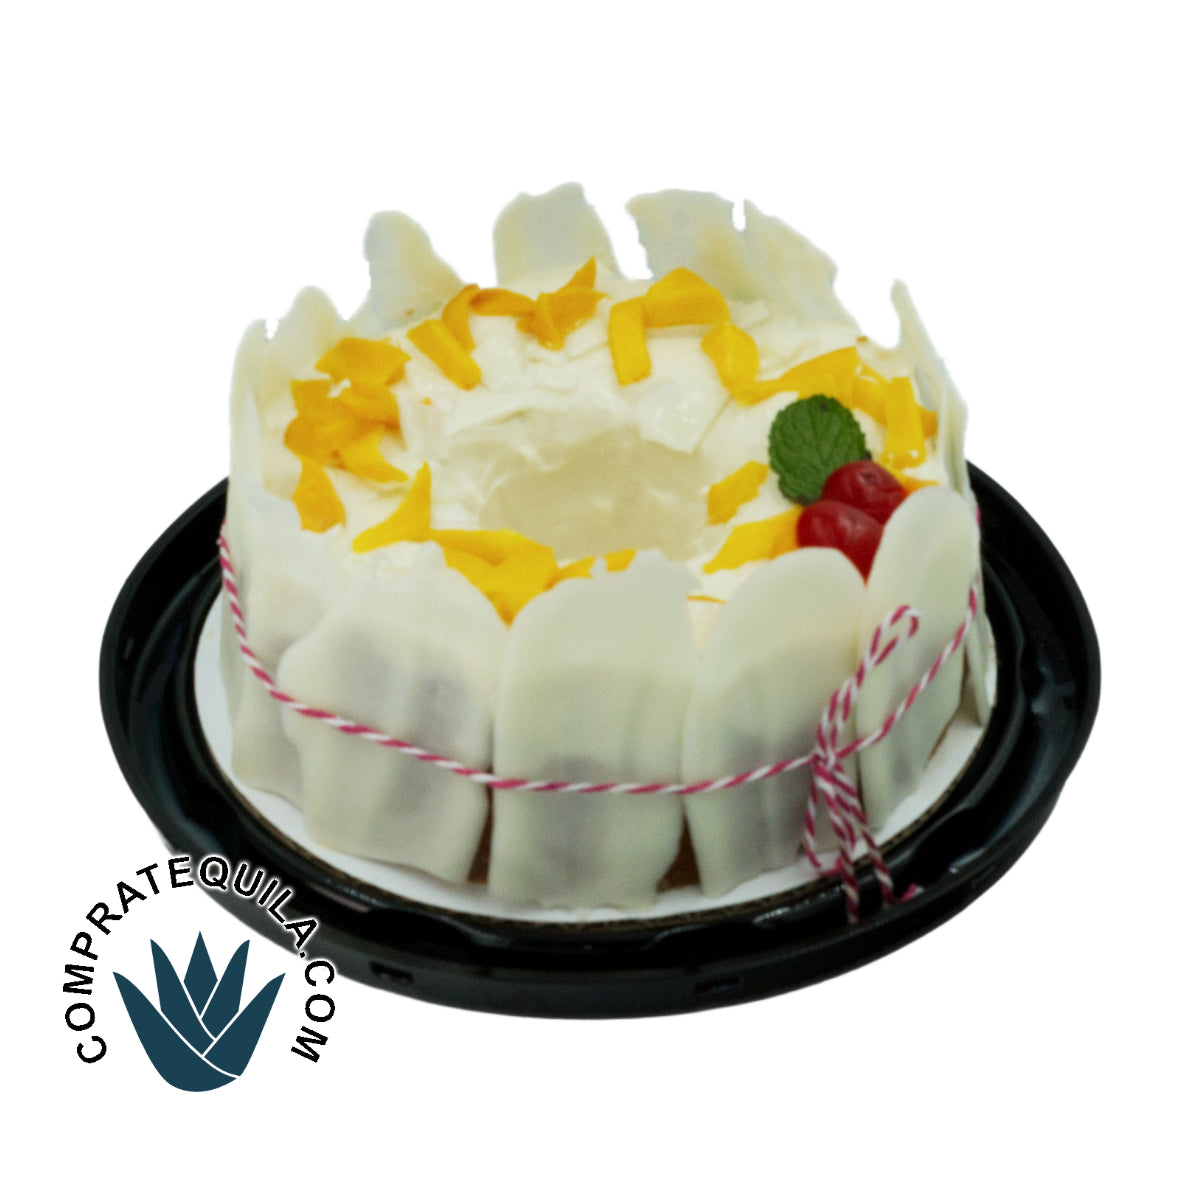 Exclusive Tres Leches Cake with a Touch of Baileys: A Delight to Share at Any Celebration